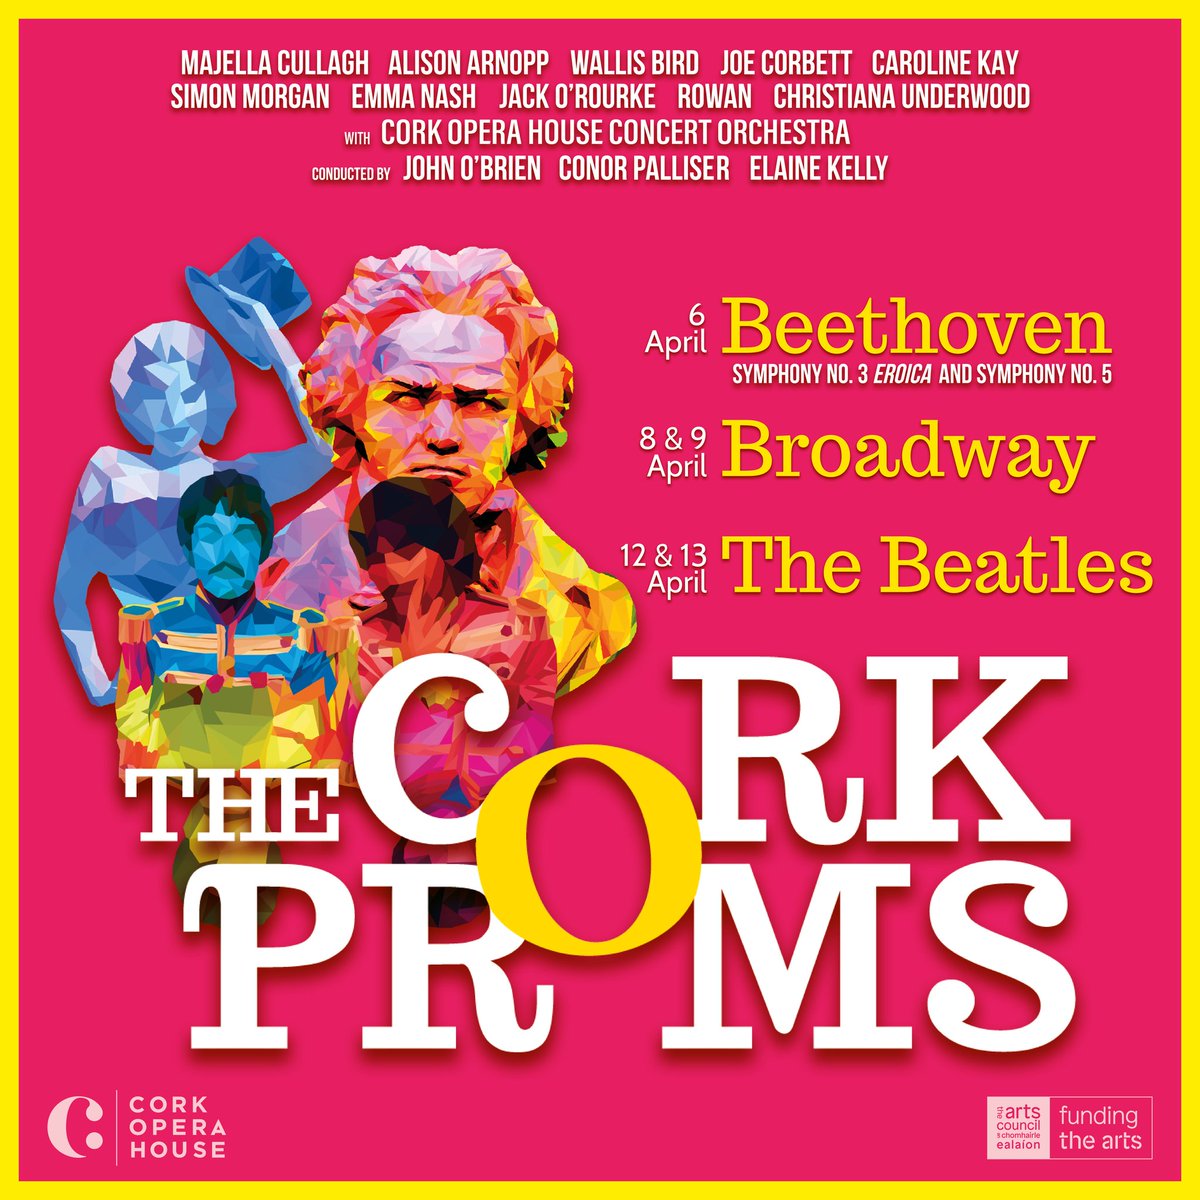 We are delighted to announce the line-up for The Cork Proms 2023, taking place this April! As you can see, it's a tremendous array of talent we have in store for you as the Cork Opera House Concert Orchestra brings you the music of Beethoven, Broadway and The Beatles! 🎼🎻🎸🎷💐